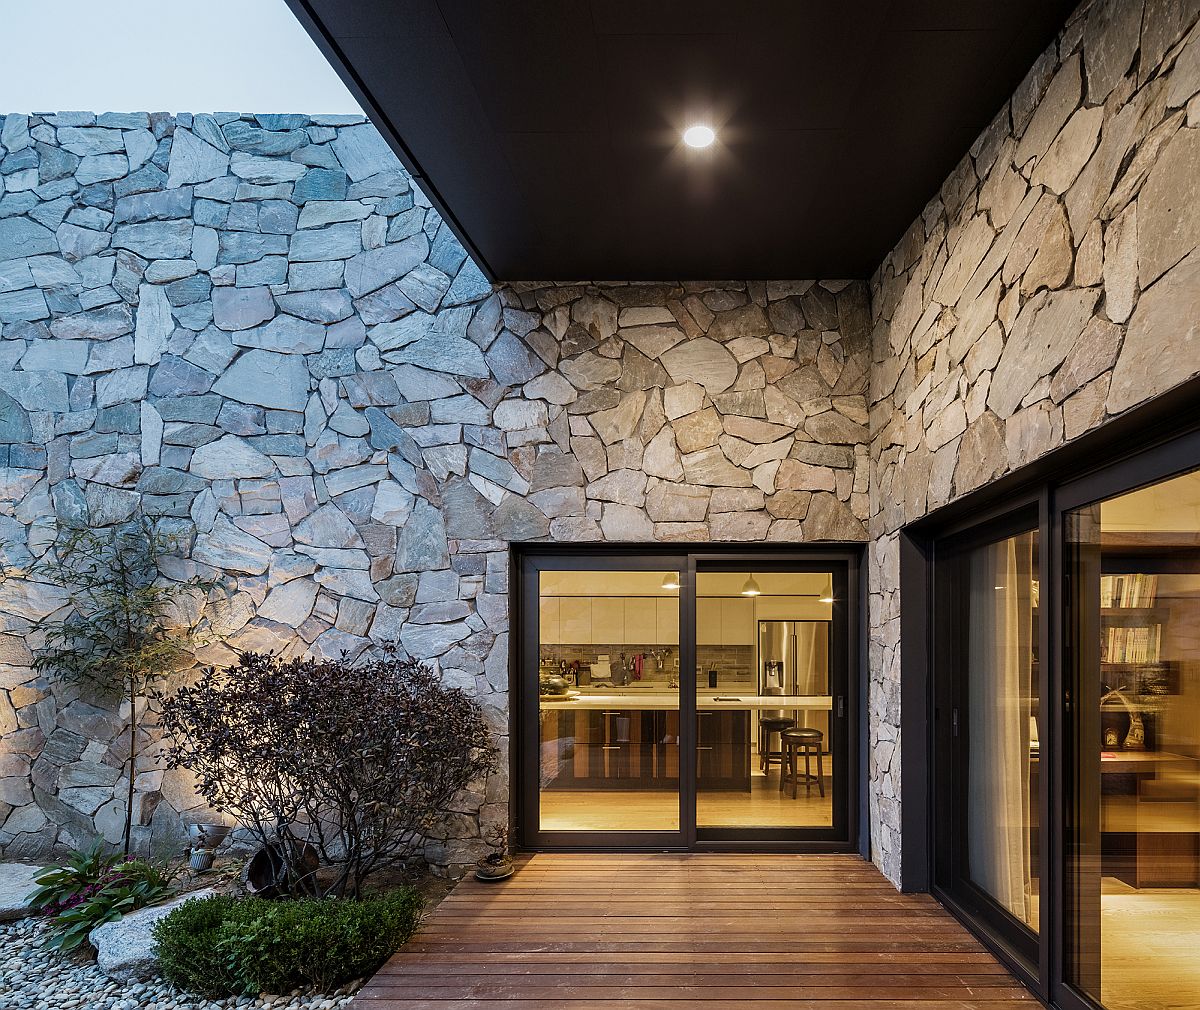 Sliding glass doors, stone and wood come together at the Layers